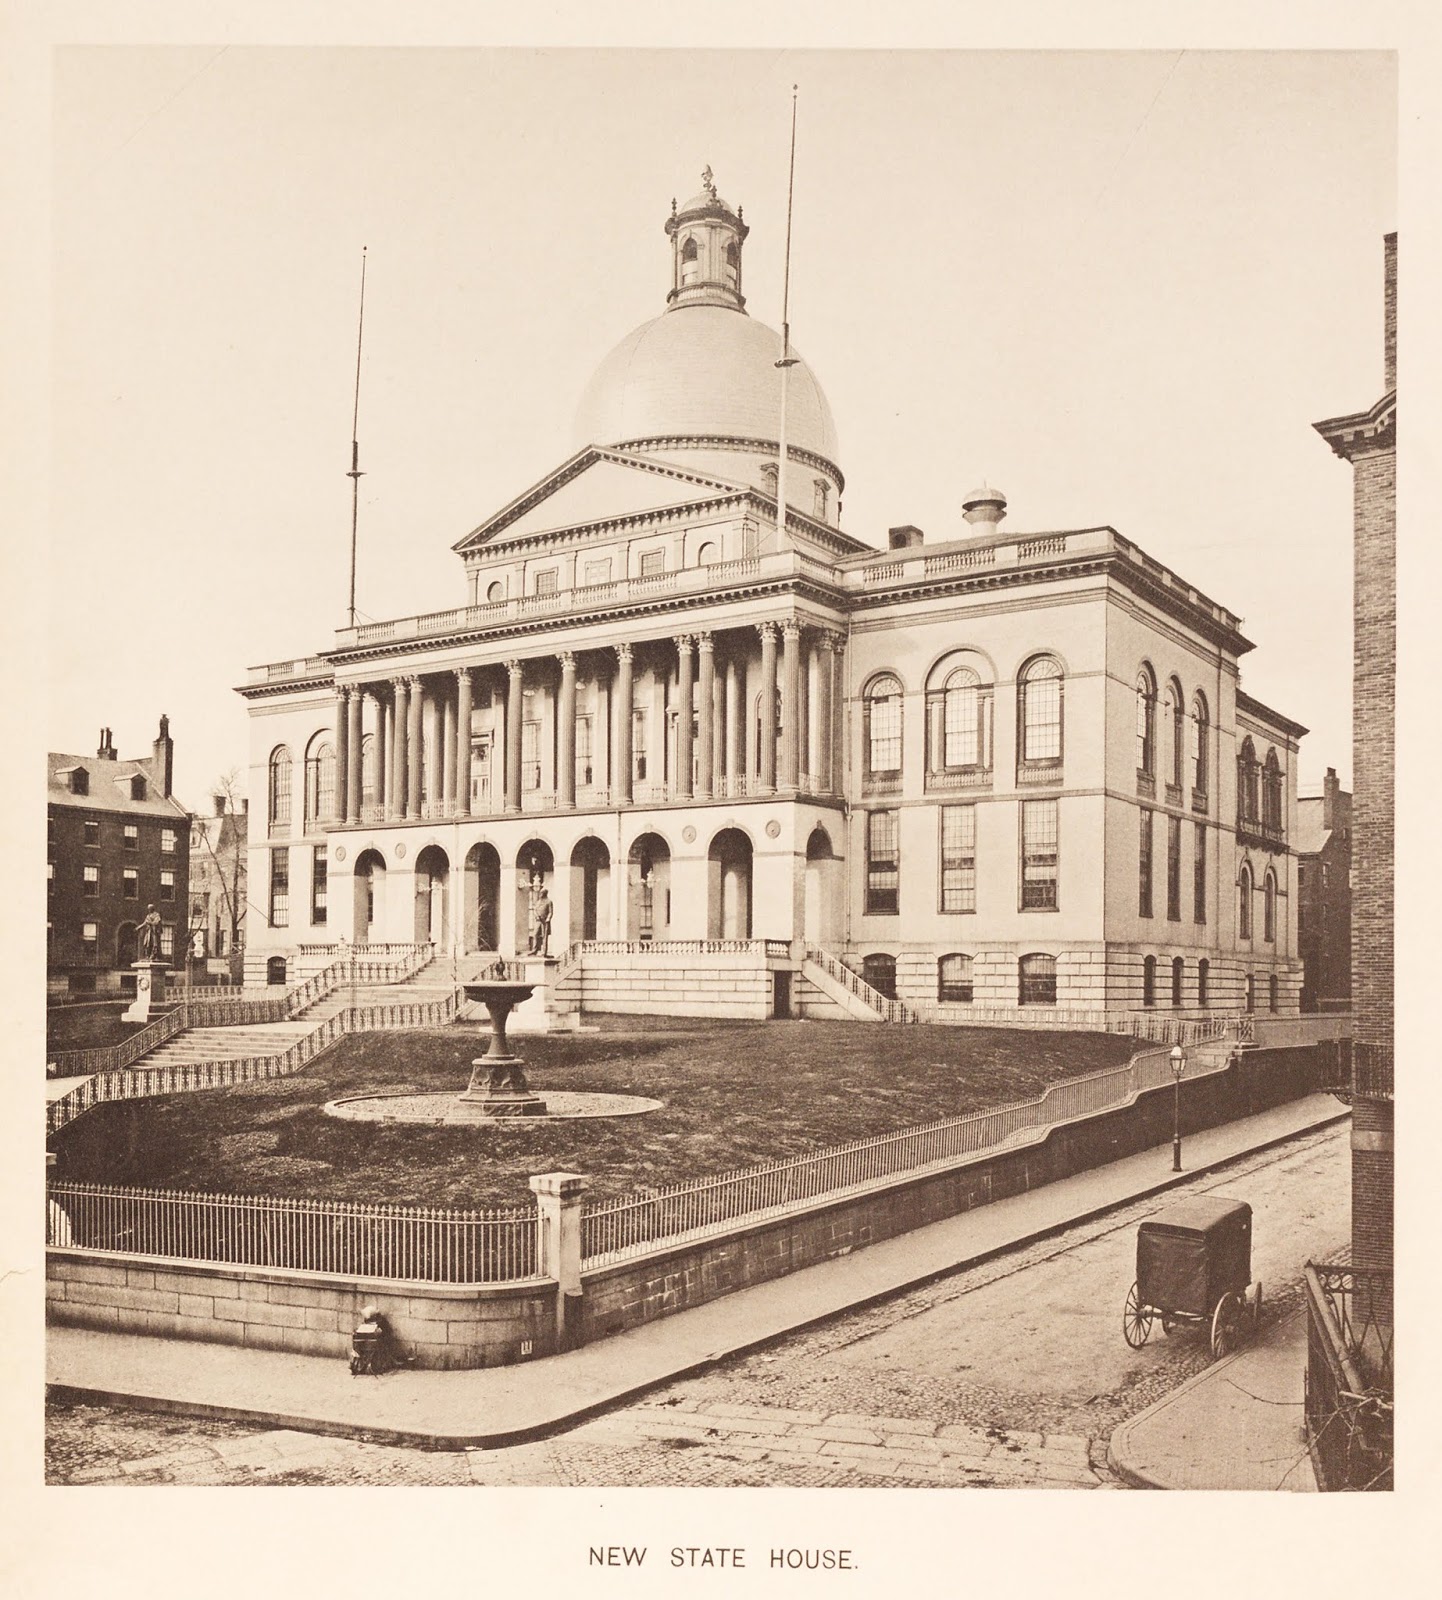 State Library of Massachusetts: The “Brigham Addition” and Saving the